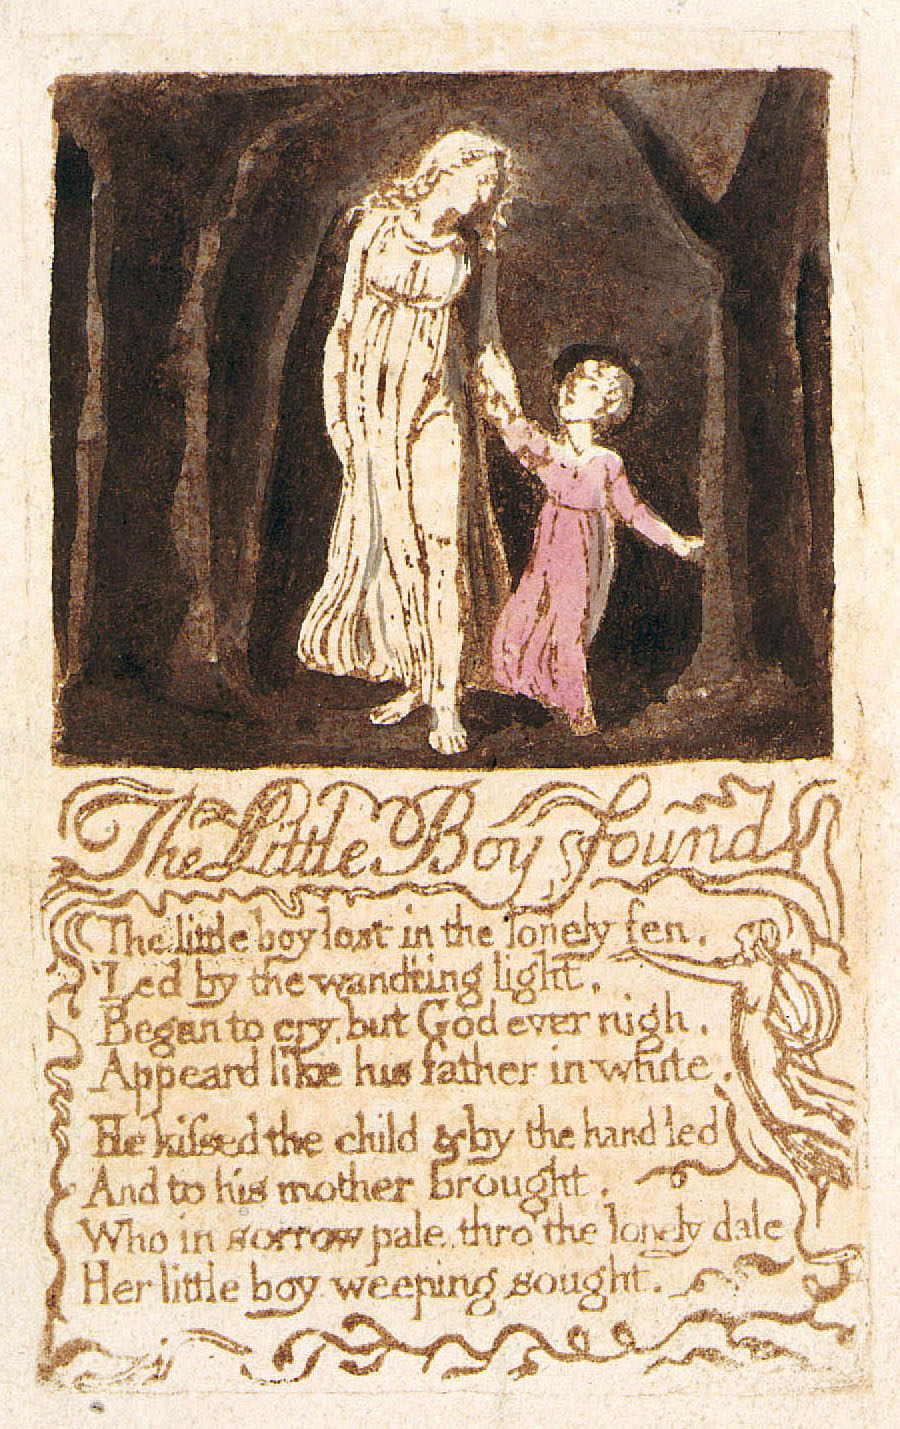 The Little Boy Found
	The little boy lost in the lonely fen,
	Led by the wand’ring light,
	Began to cry, but God ever nigh,
	Appeard like his father in white,
	He kissed the child & by the hand led
	And to his mother brought,
	Who in sorrow pale, thro’ the lonely dale
	Her little boy weeping sought.